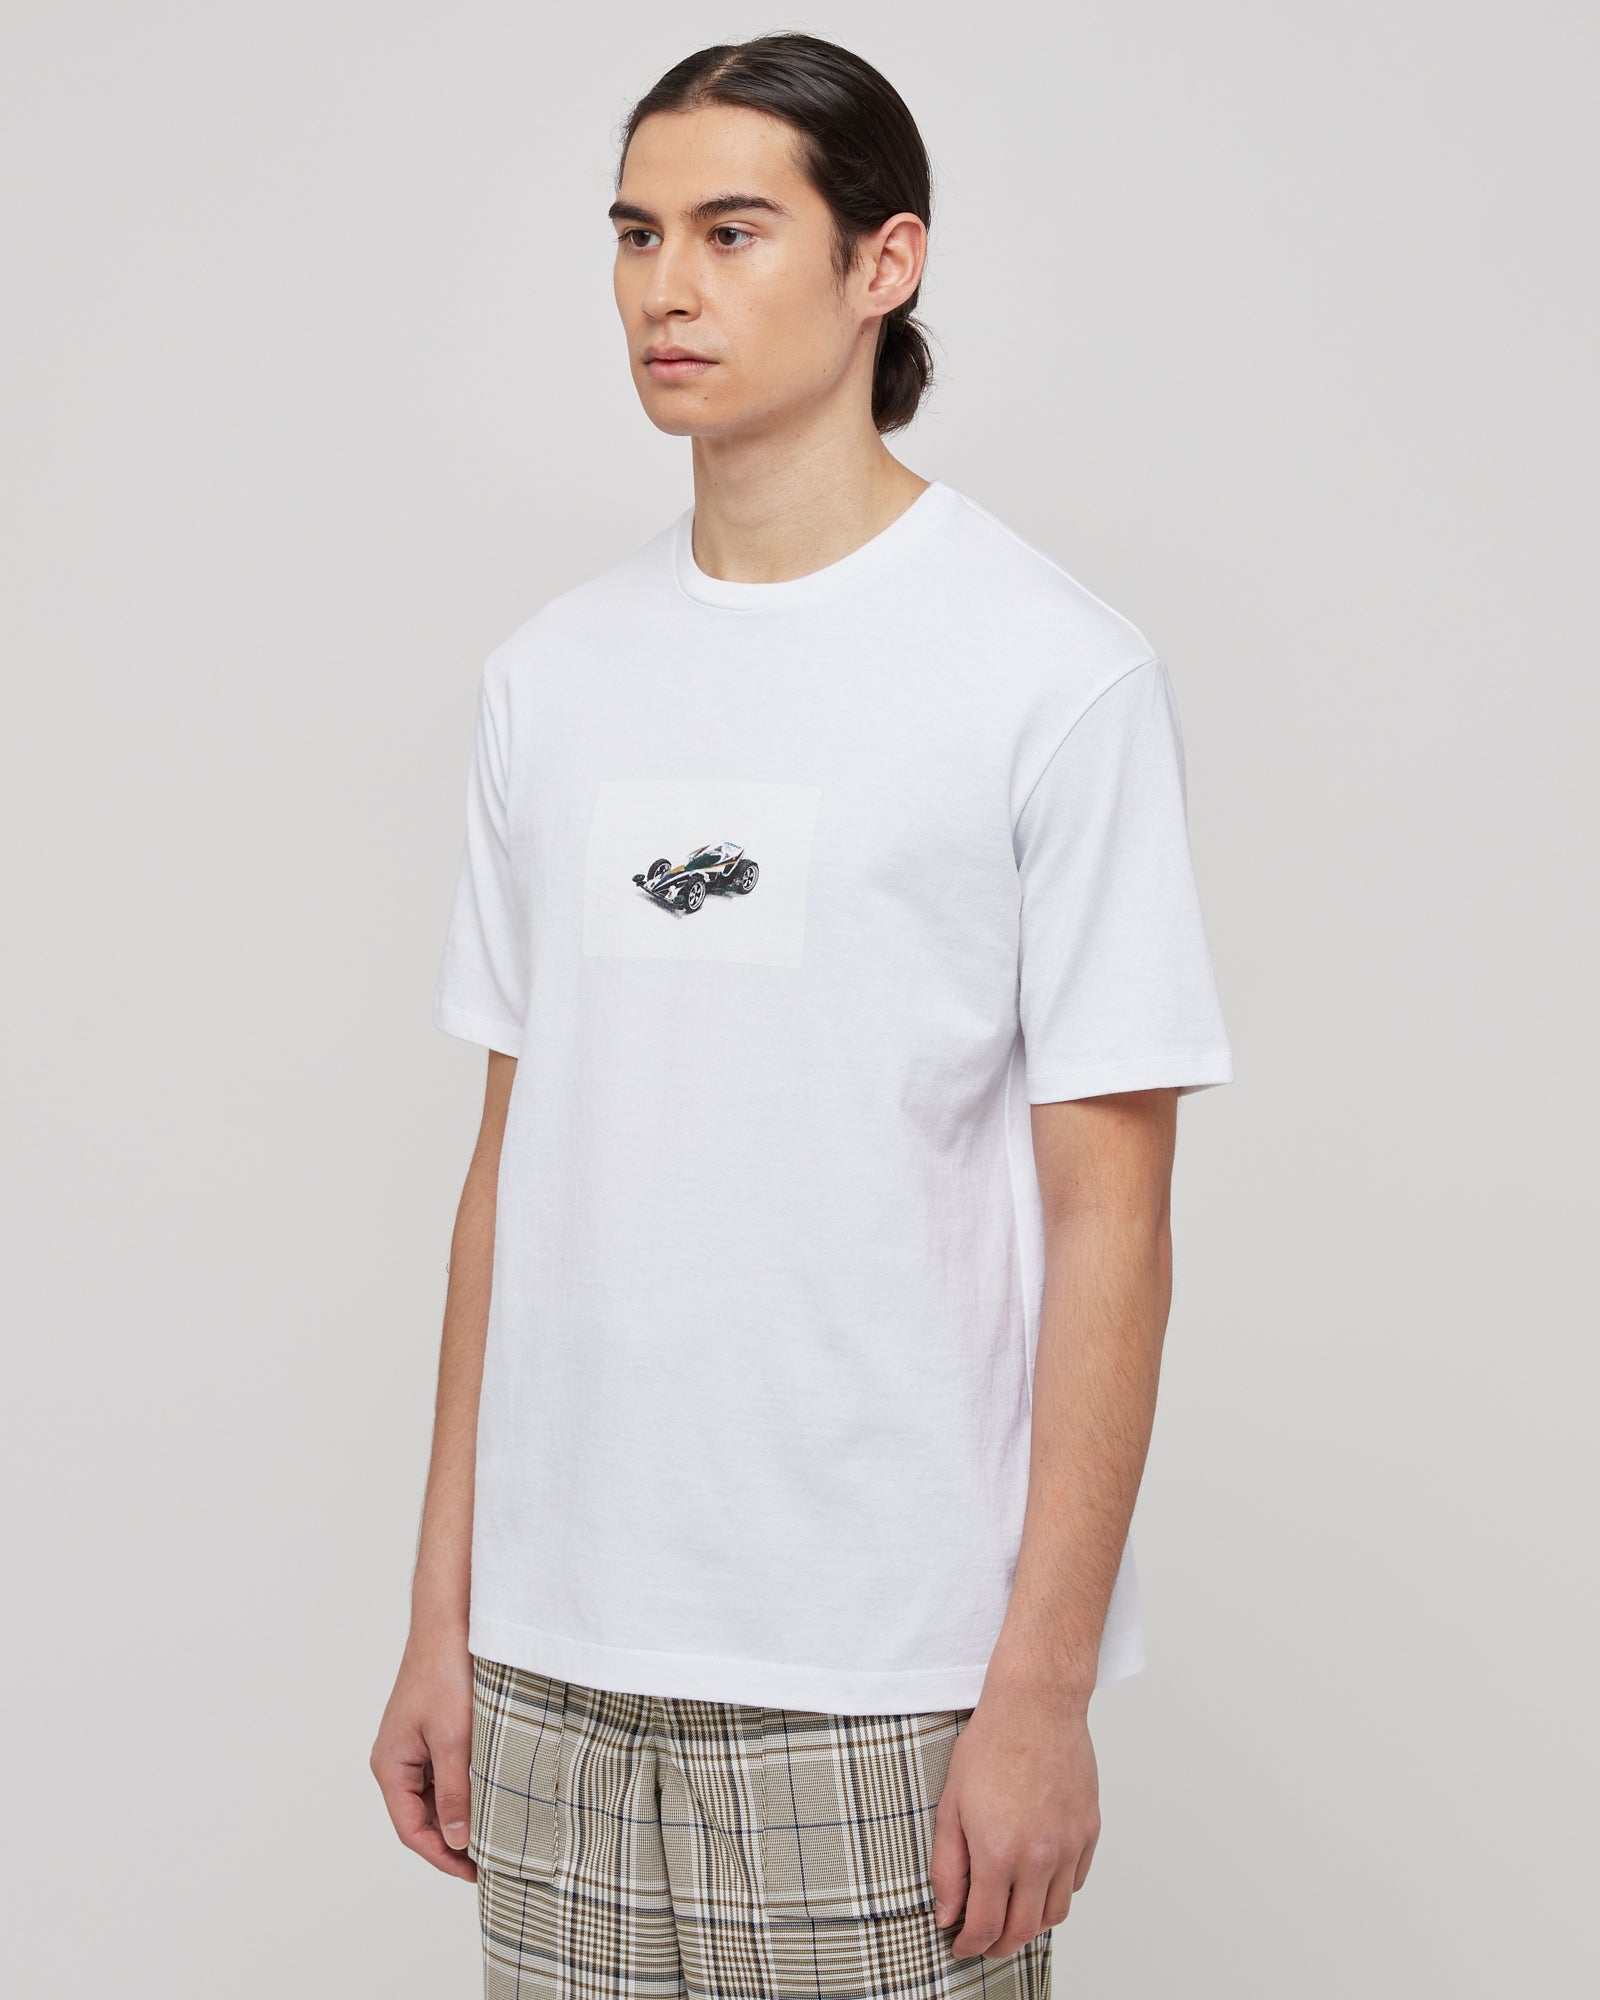 Goodfight x RG Super 1 Tee in White